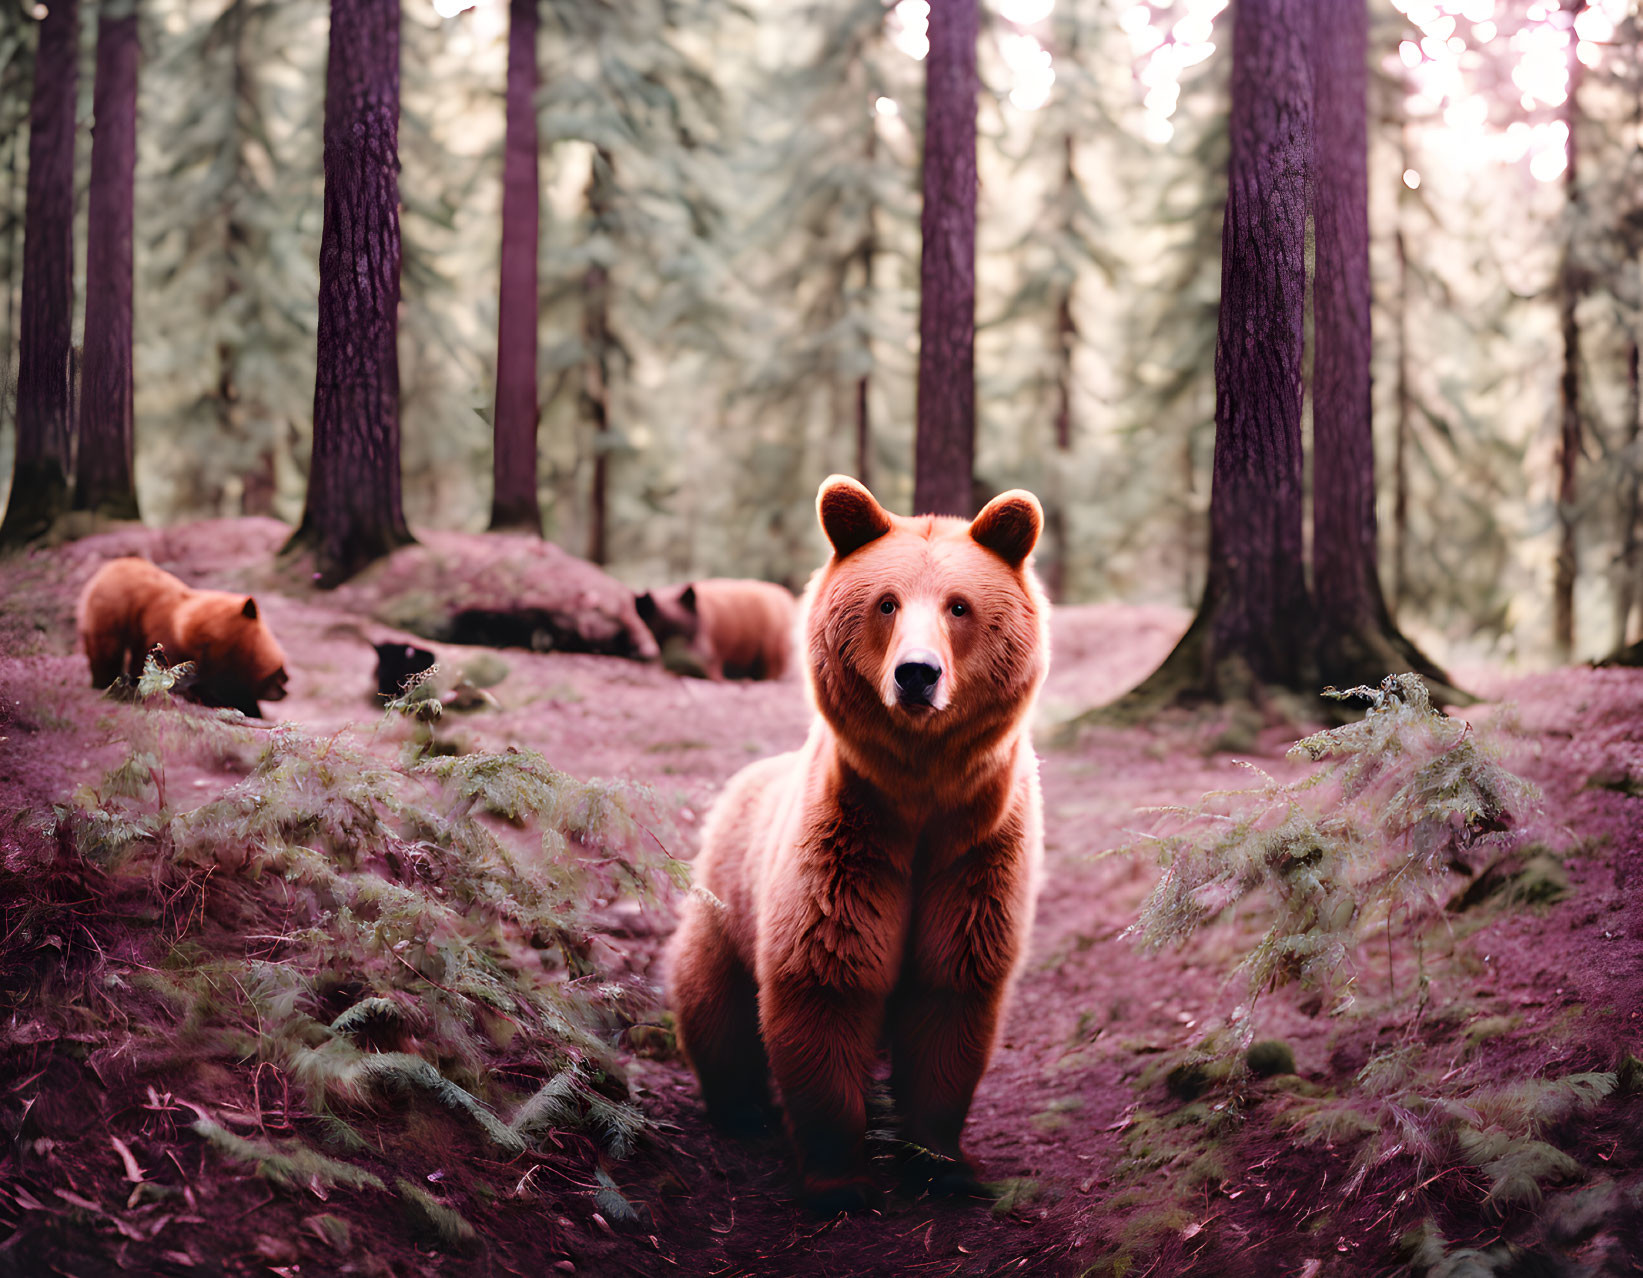 Brown Bear Surrounded by Forest Trees and Ferns